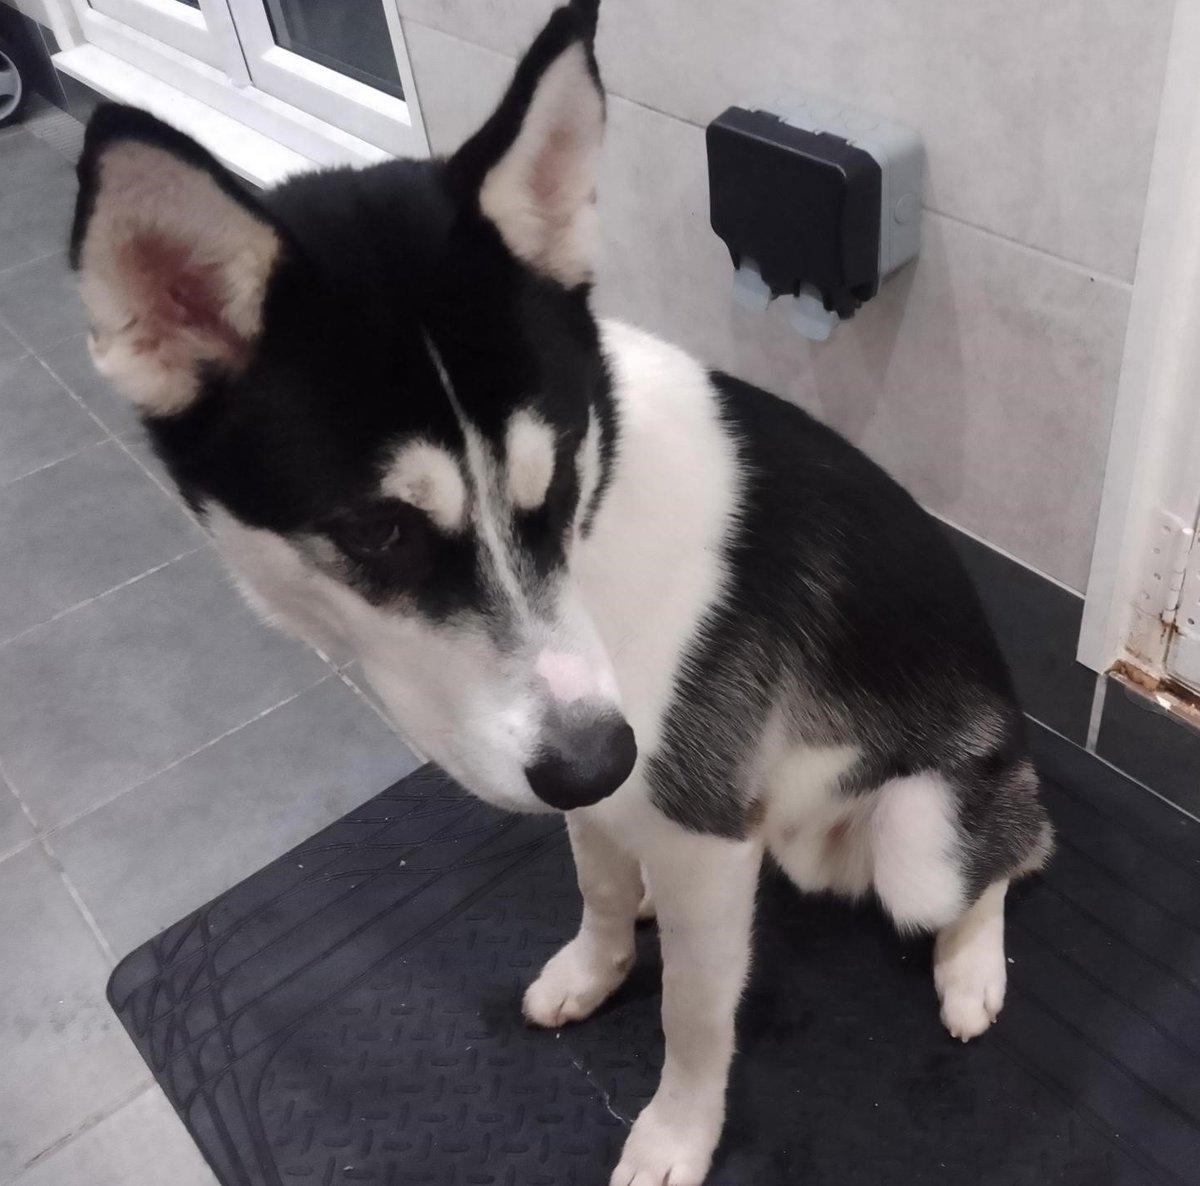 Please retweet to HELP FIND THE OWNER OR A RESCUE SPACE FOR THIS STRAY DOG FOUND/ABANDONED #EPSOM #SURREY #UK MAY BE AT RISK OF EUTHANASIA 🆘 Young, male Husky, chip not registered found 5 January. Now in a council pound, he could be missing or stolen from another region.…